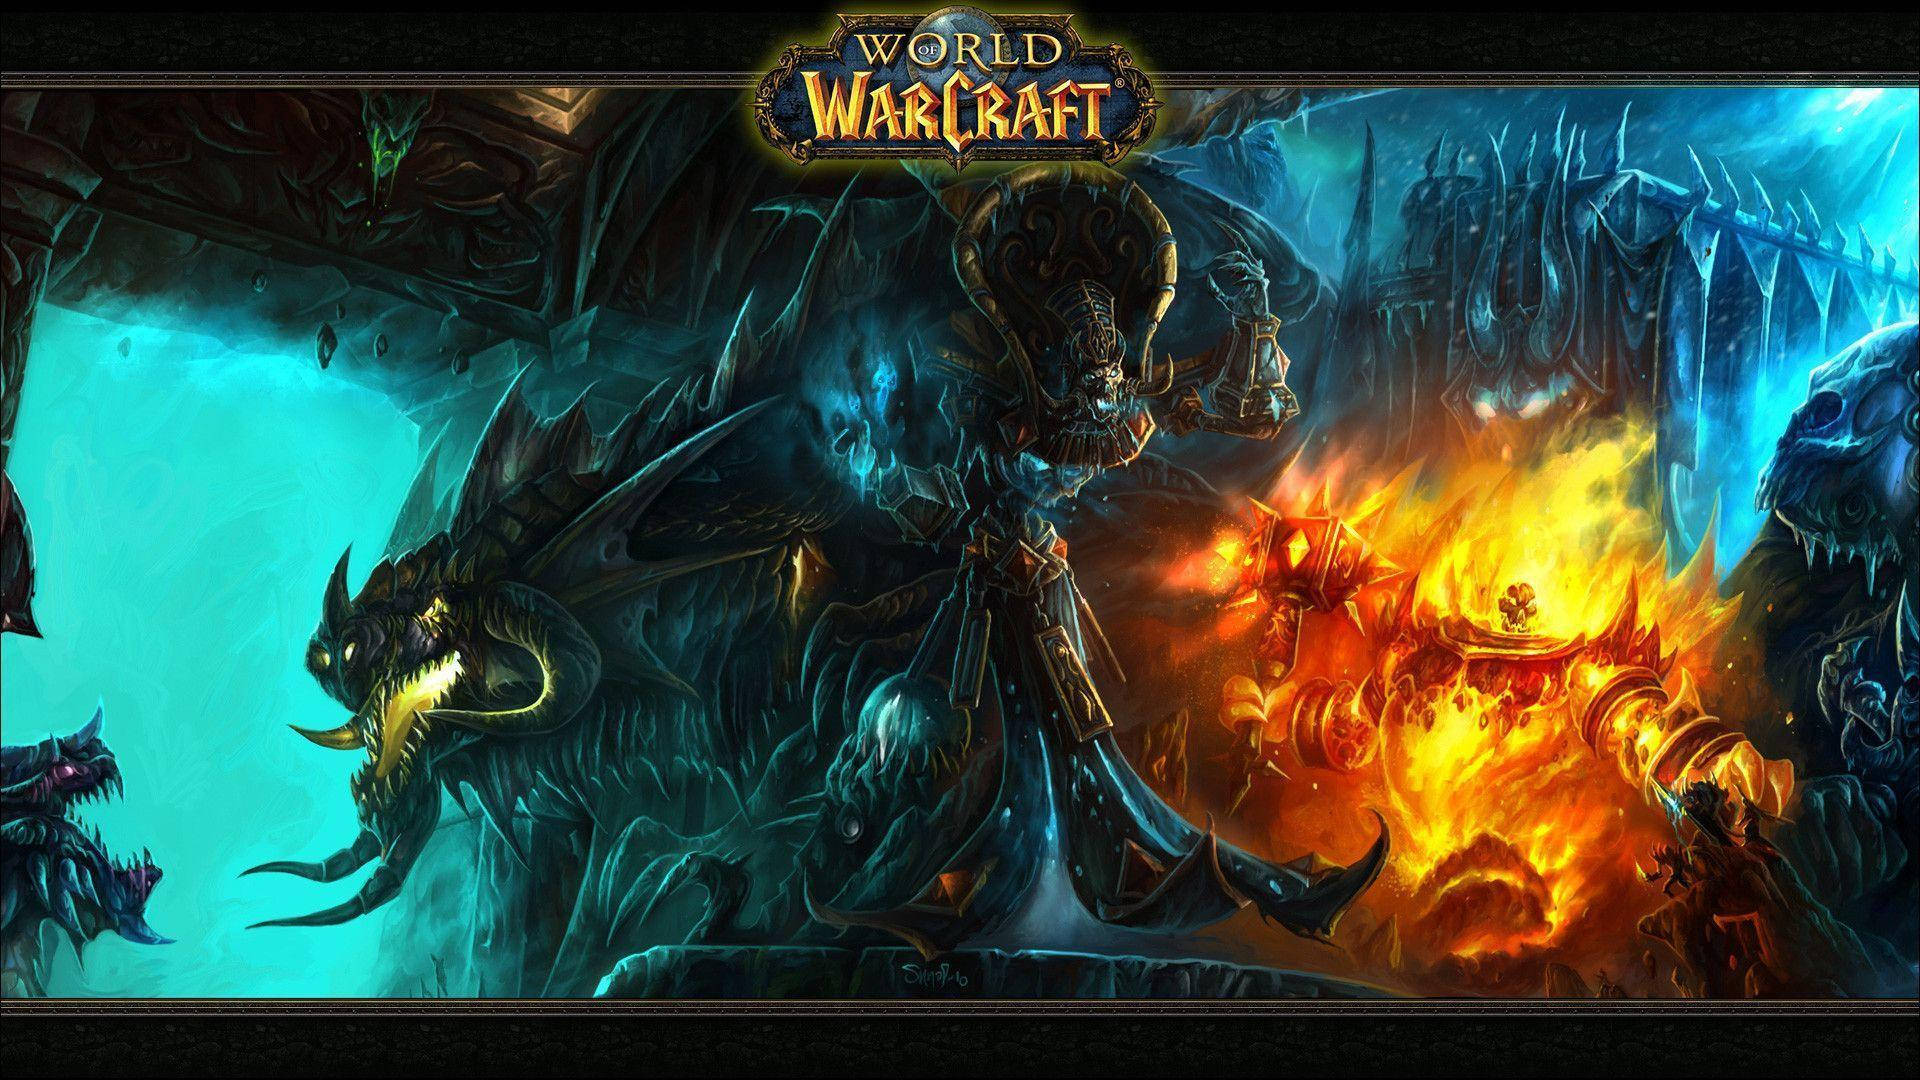 An Epic Battle Between Kel'Thuzad, leader of the Scourge and Deathwing, father of the dragon Aspects Wallpaper